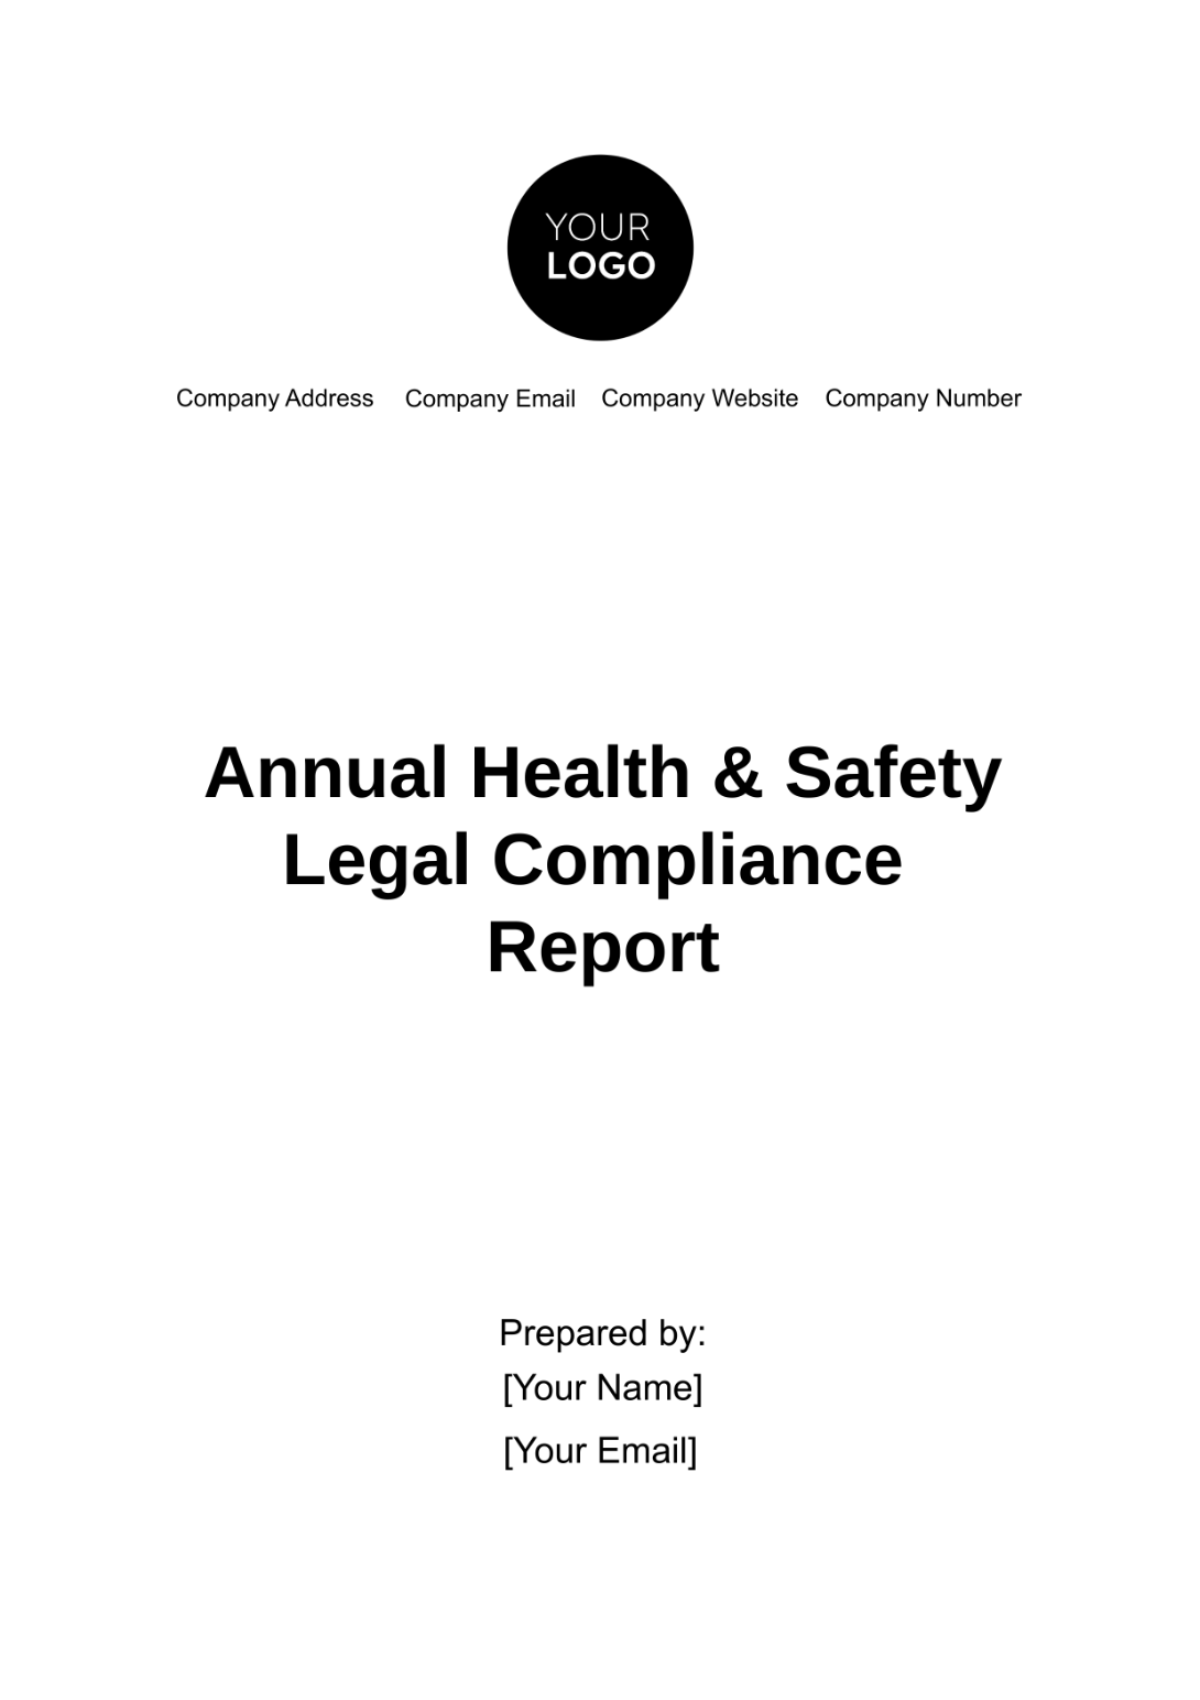 Free Annual Health & Safety Legal Compliance Report Template